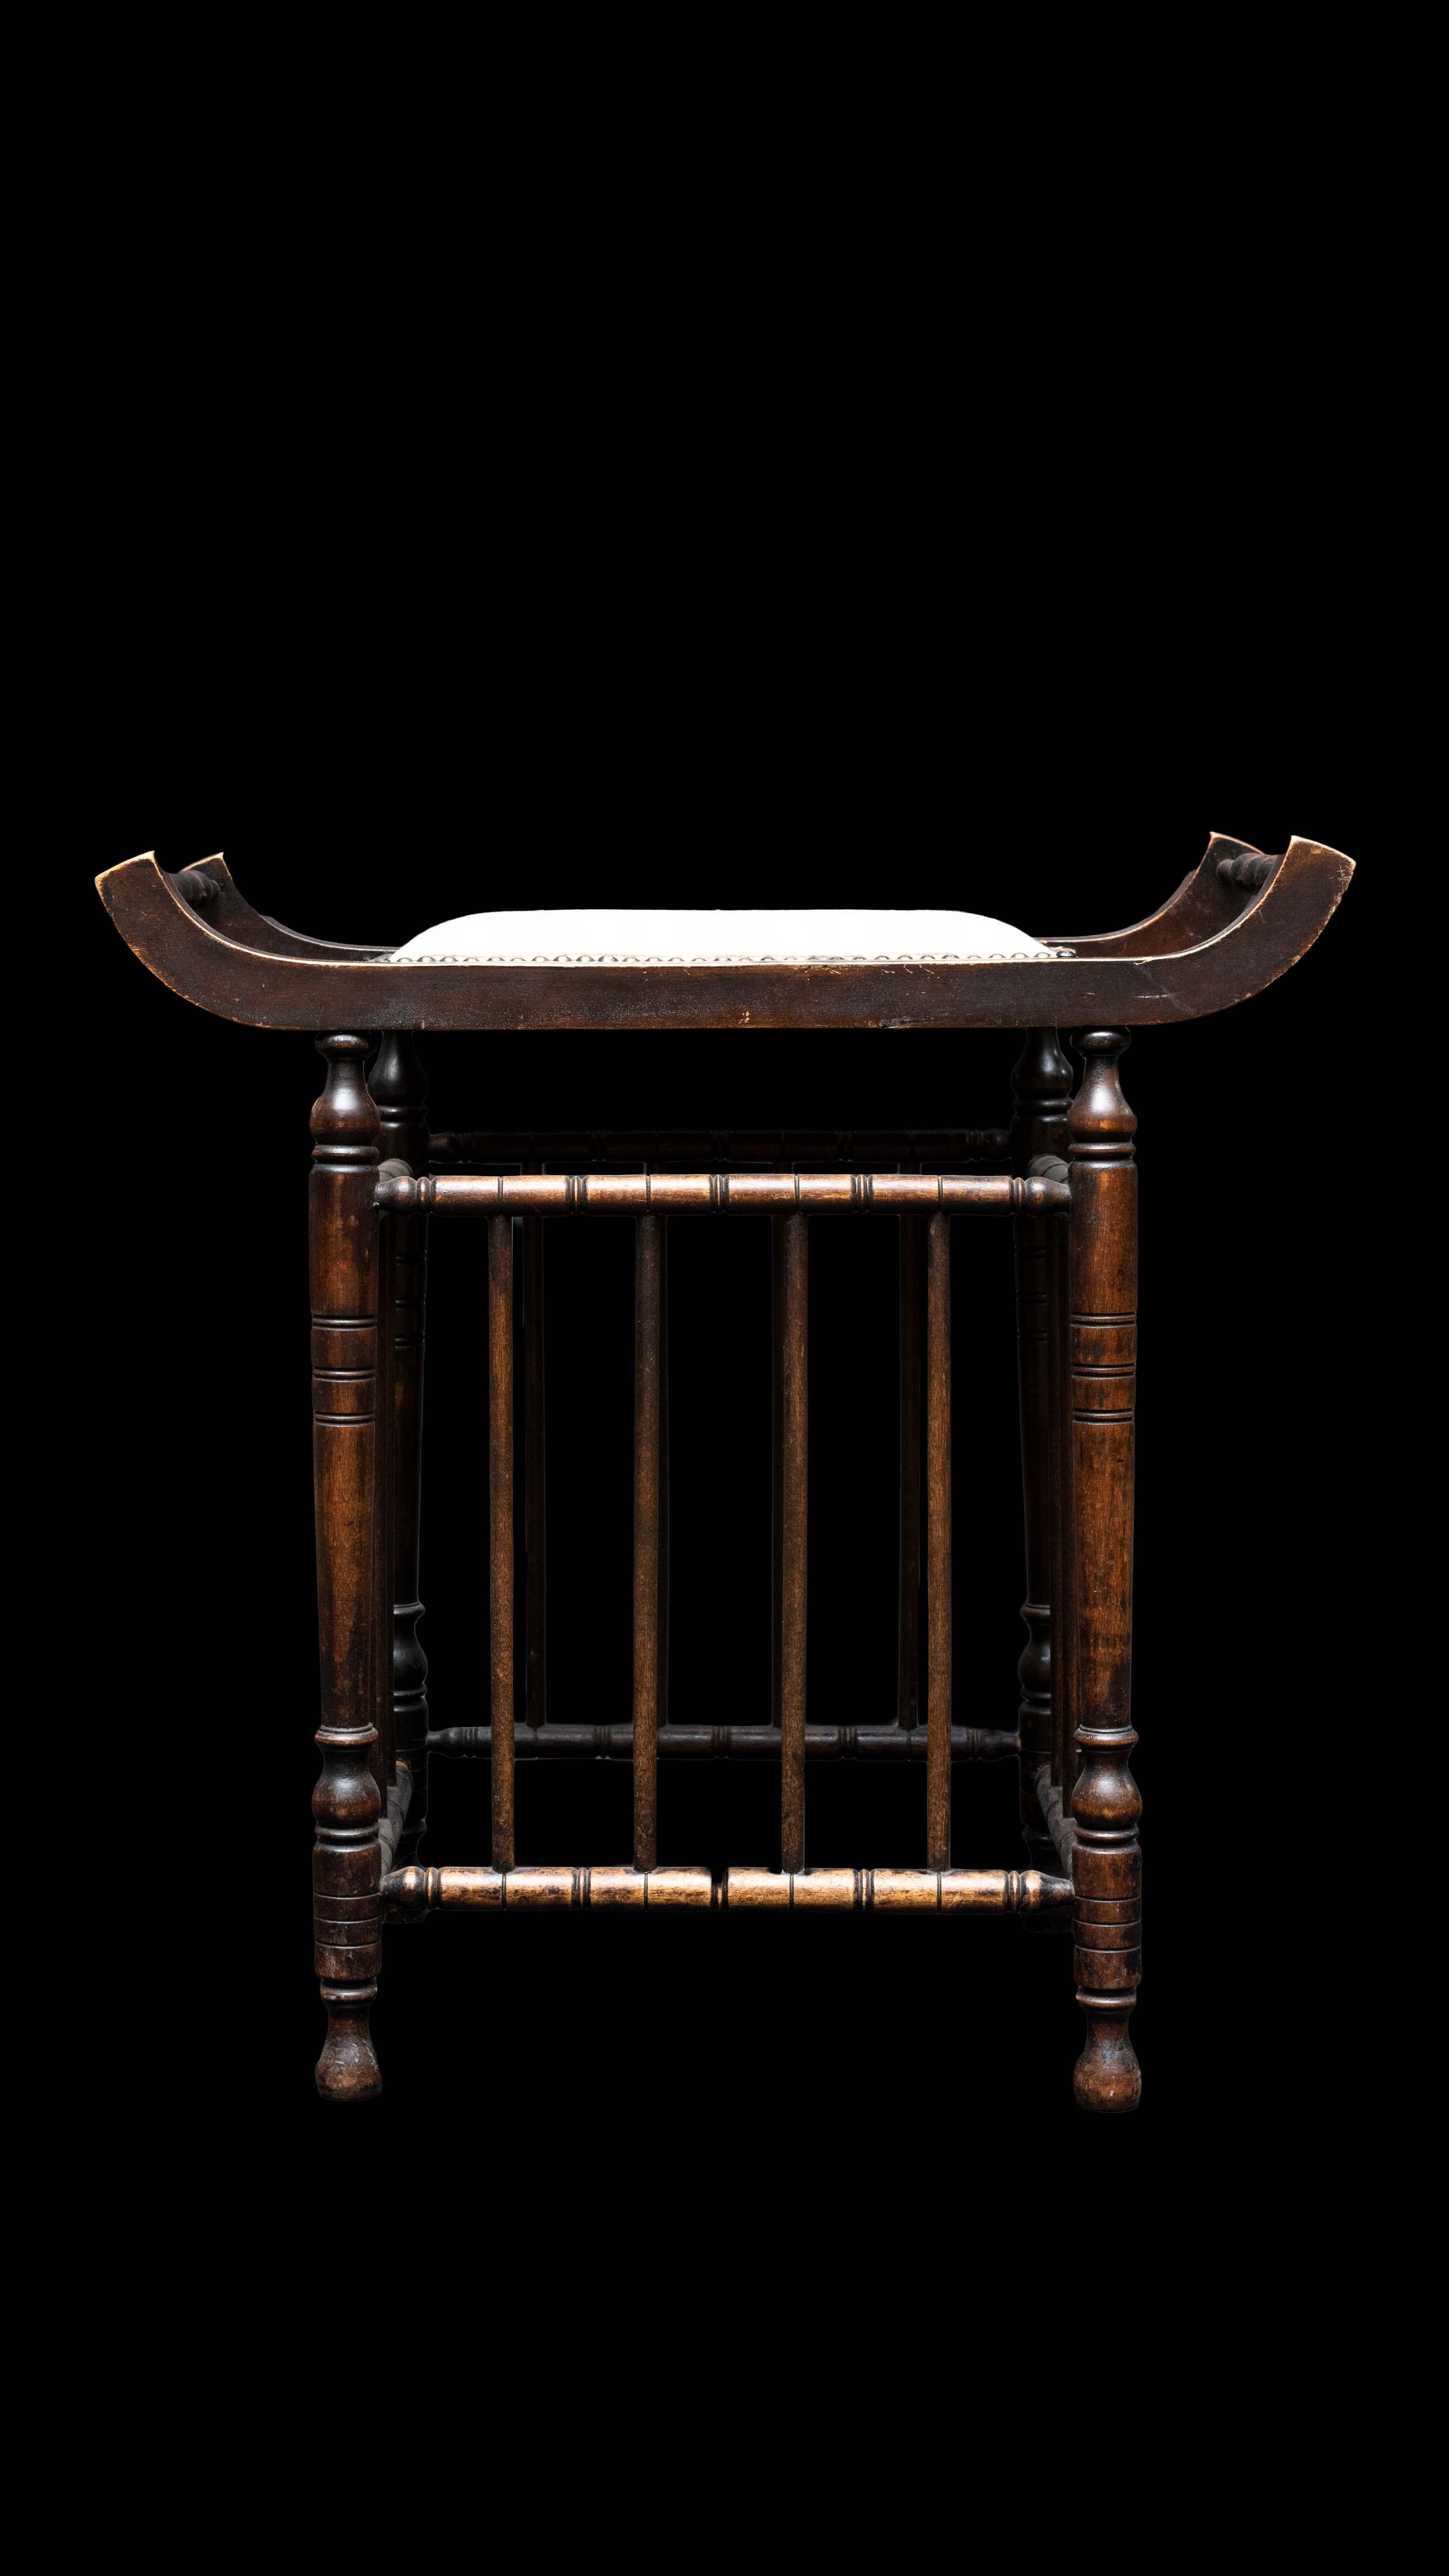 Early 20th century bamboo inspired stool:

Measures: 22.5